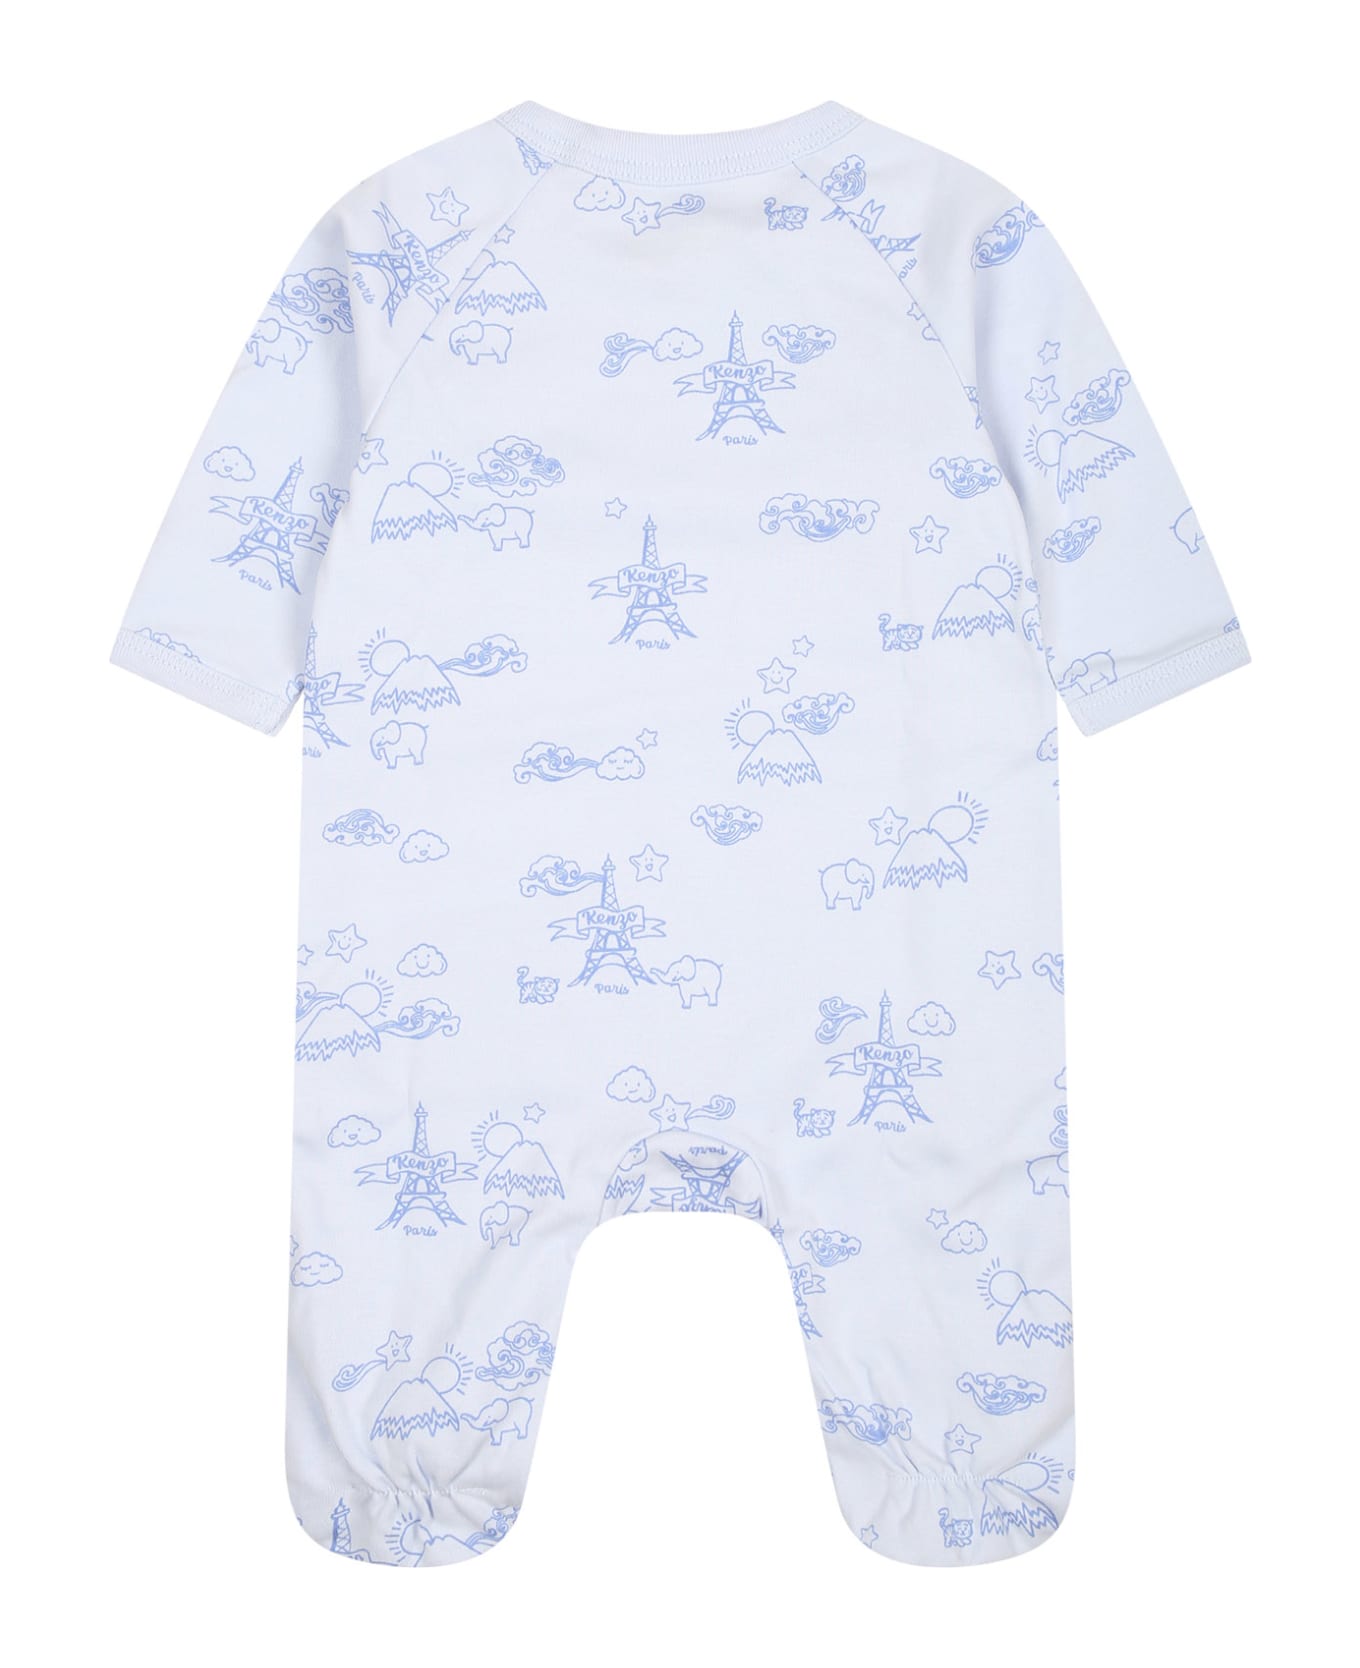 Kenzo Kids Light Blue Set For Baby Boy With Tour Eiffel And Print - Multicolor ボディスーツ＆セットアップ